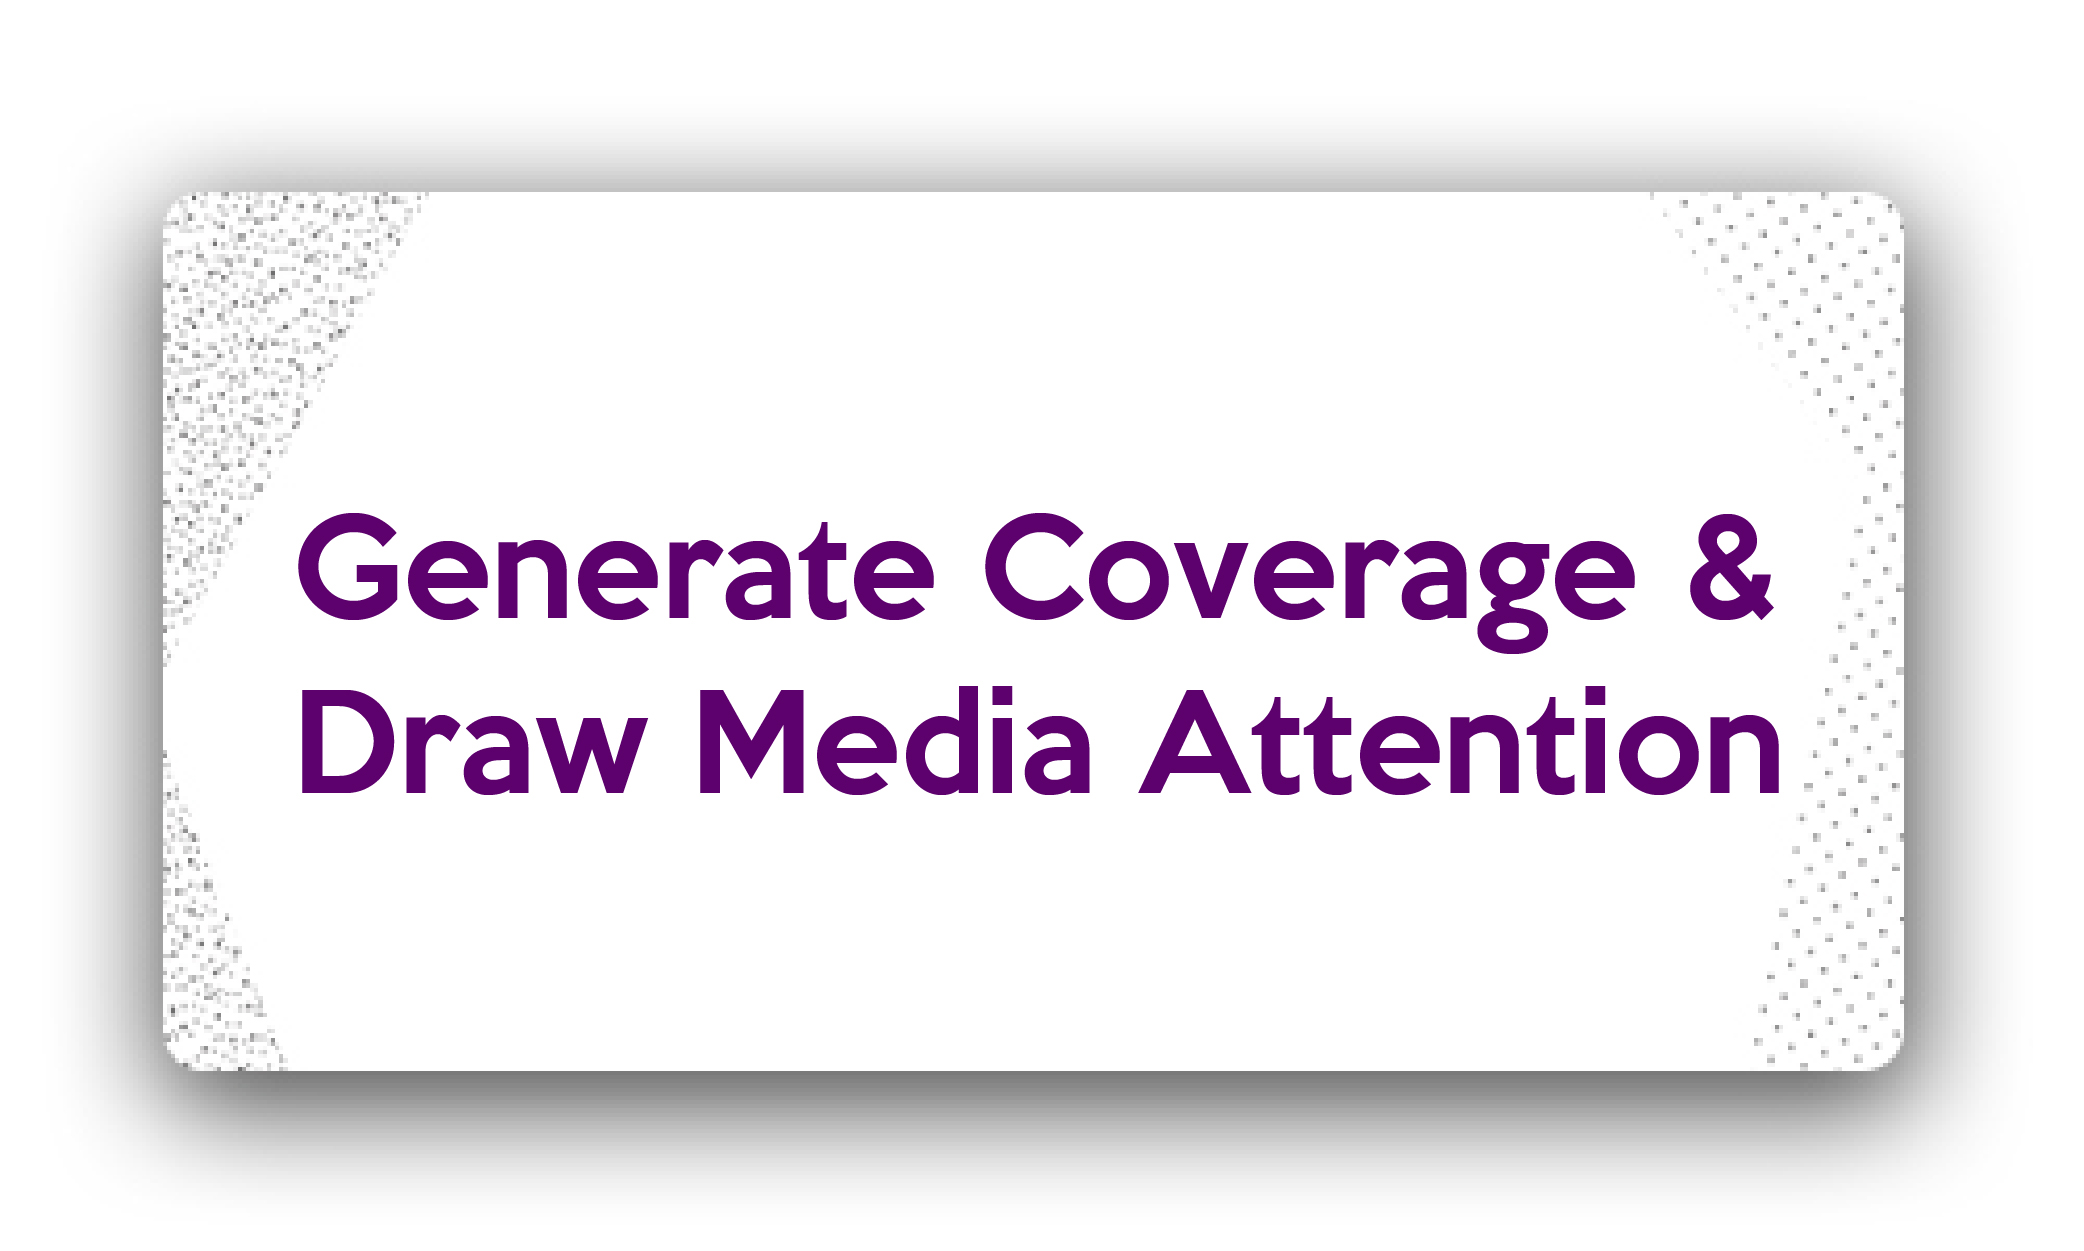 Title-How to Generate Coverage & Draw Media Attention to a Story